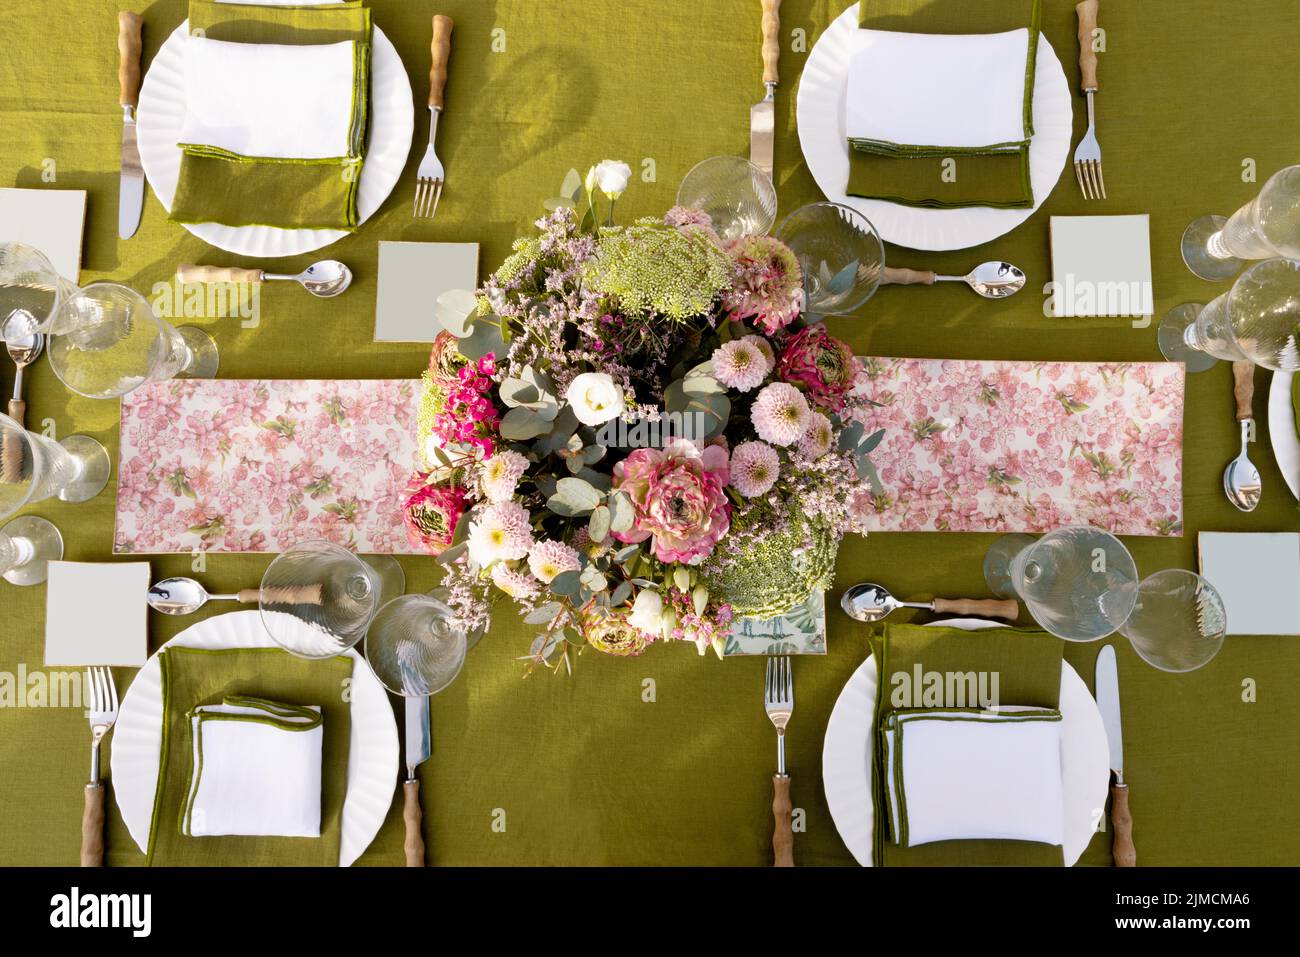 Top view of plates and cutlery served on table with fresh flowers and glassware on terrace during festive event preparation Stock Photo